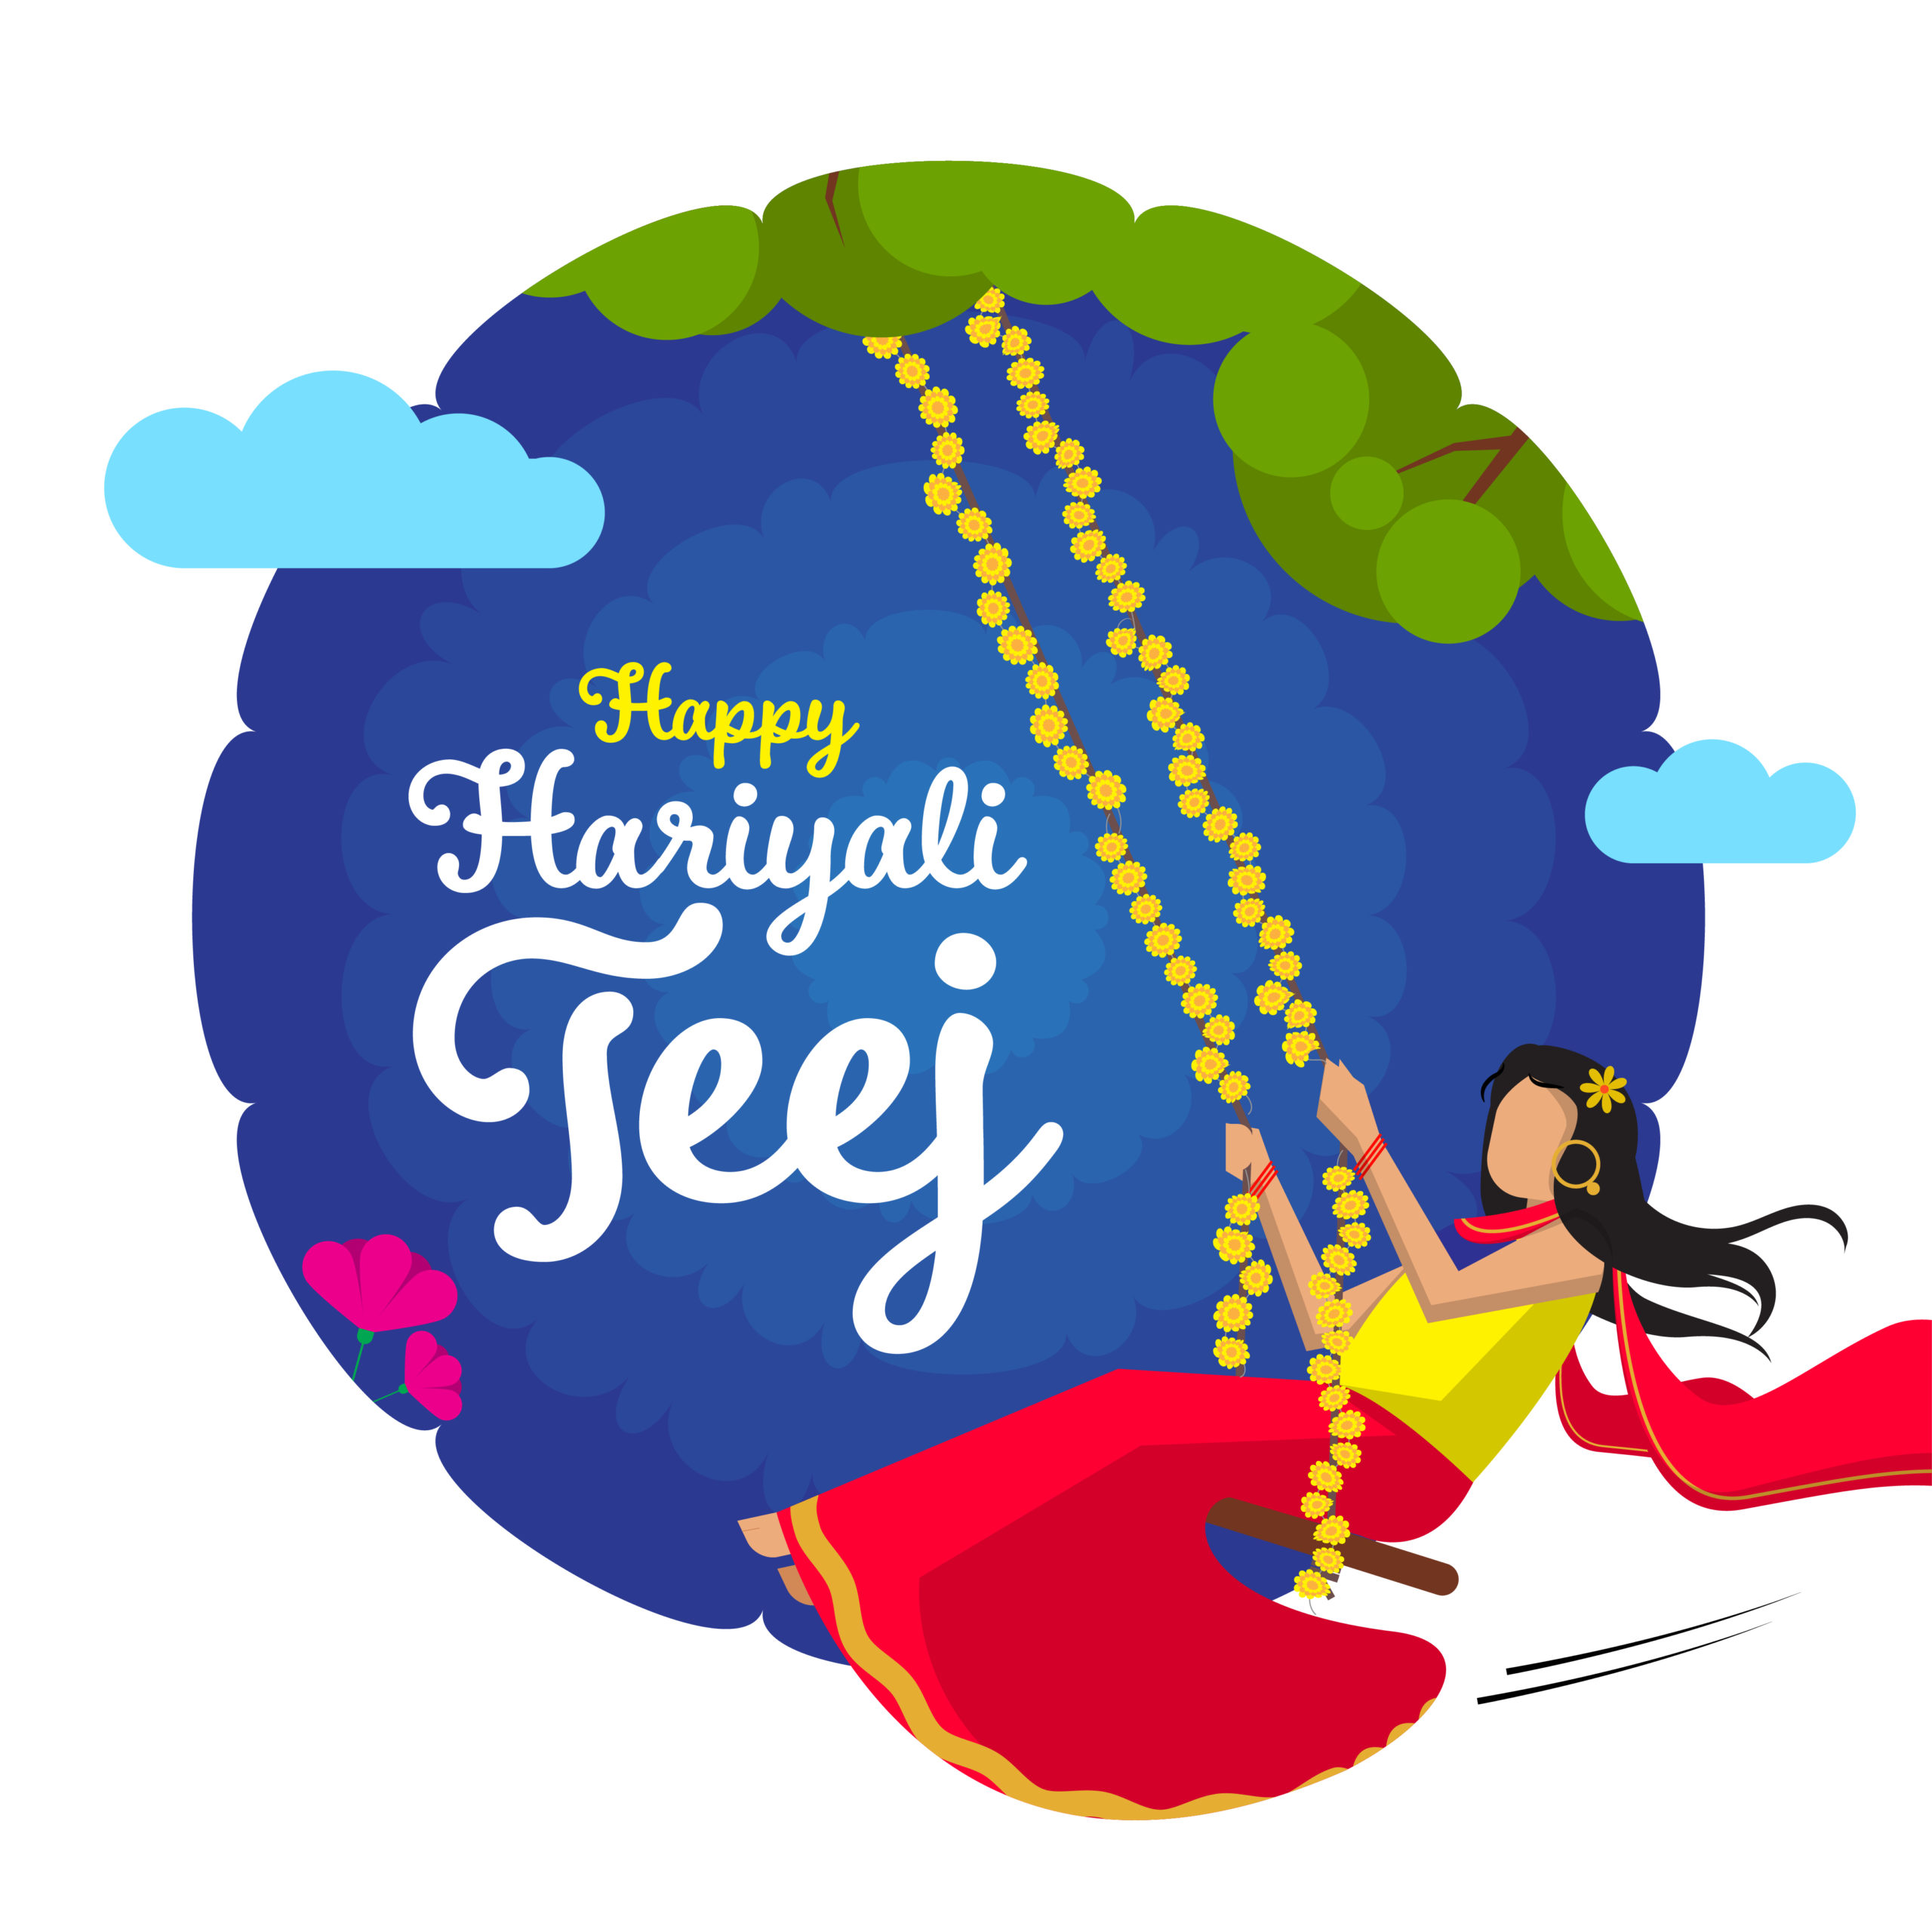 Happy Hartalika Teej 2022: Hindi Wishes, Messages, Greetings, Quotes, Images, Shayari to greet your Loved Ones